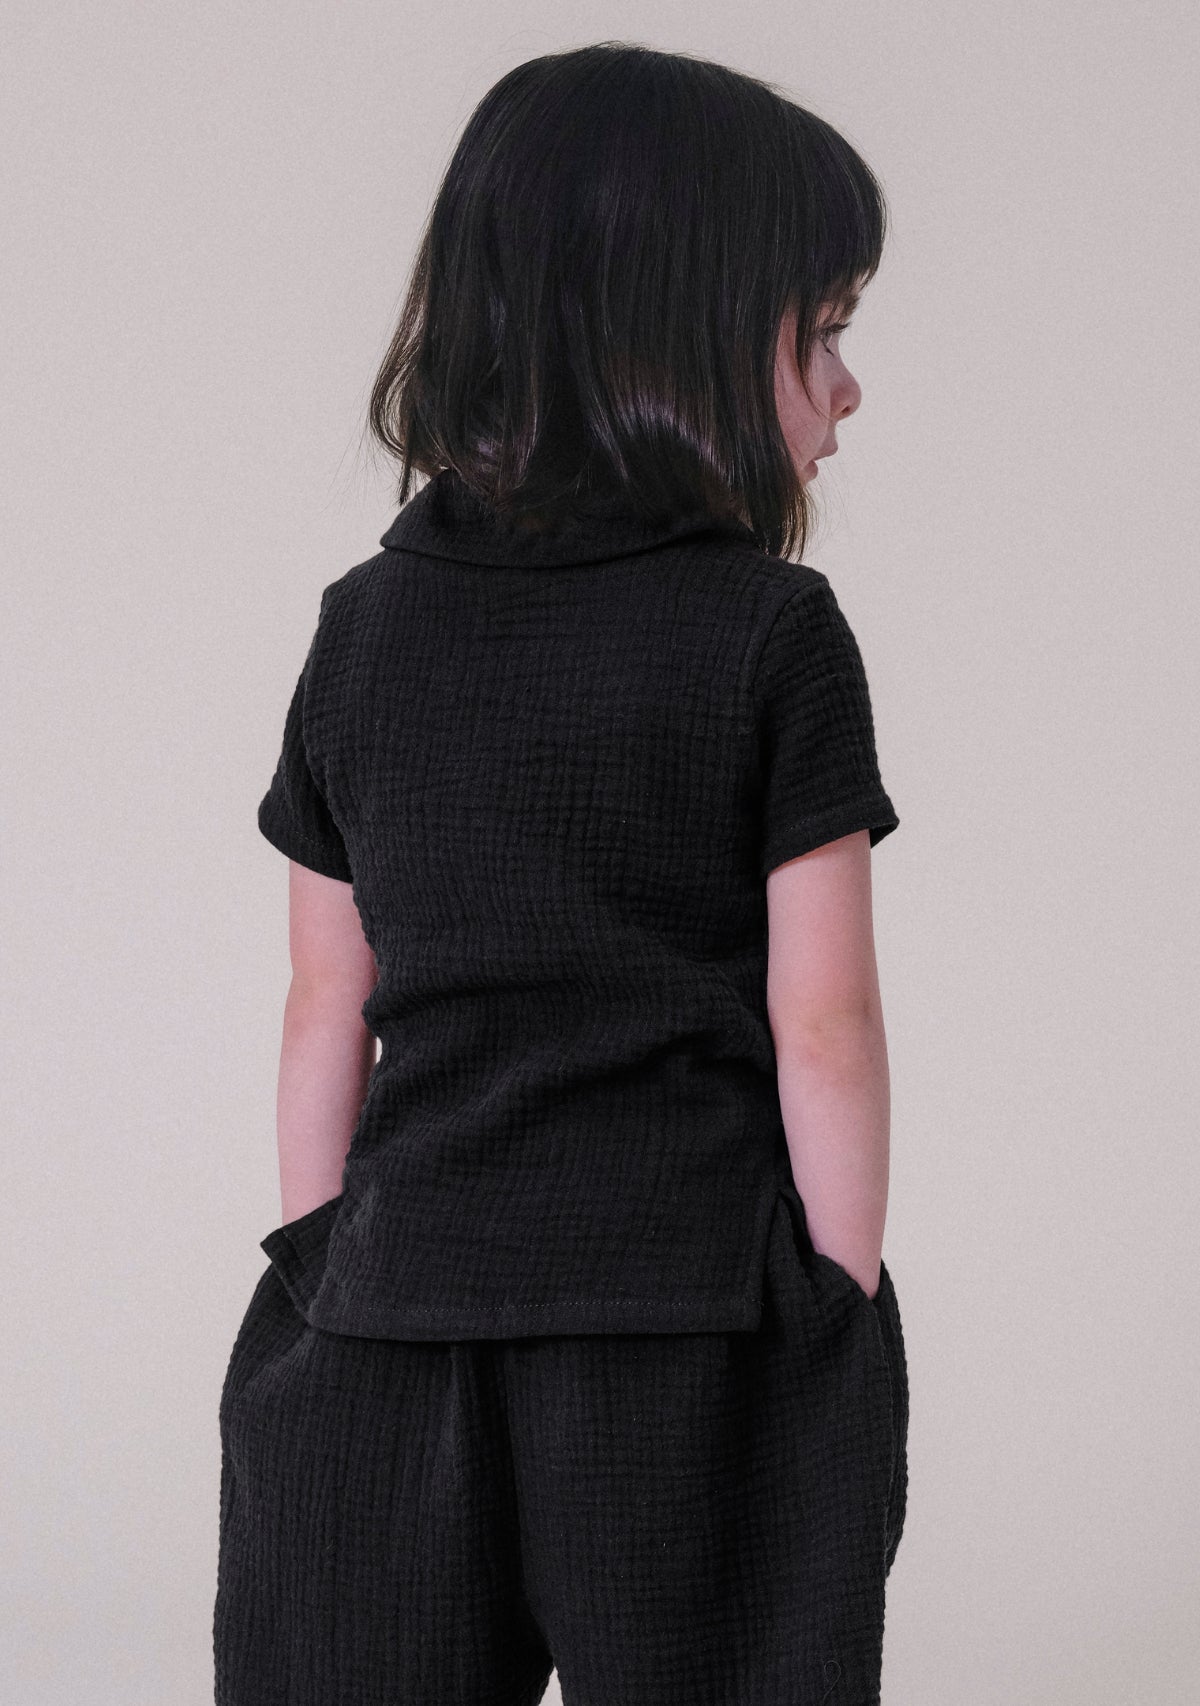 Black Organic Cotton Toddler Top and matching pant made ethically in Los Angeles, California. Sustainable Matching Toddler Sets